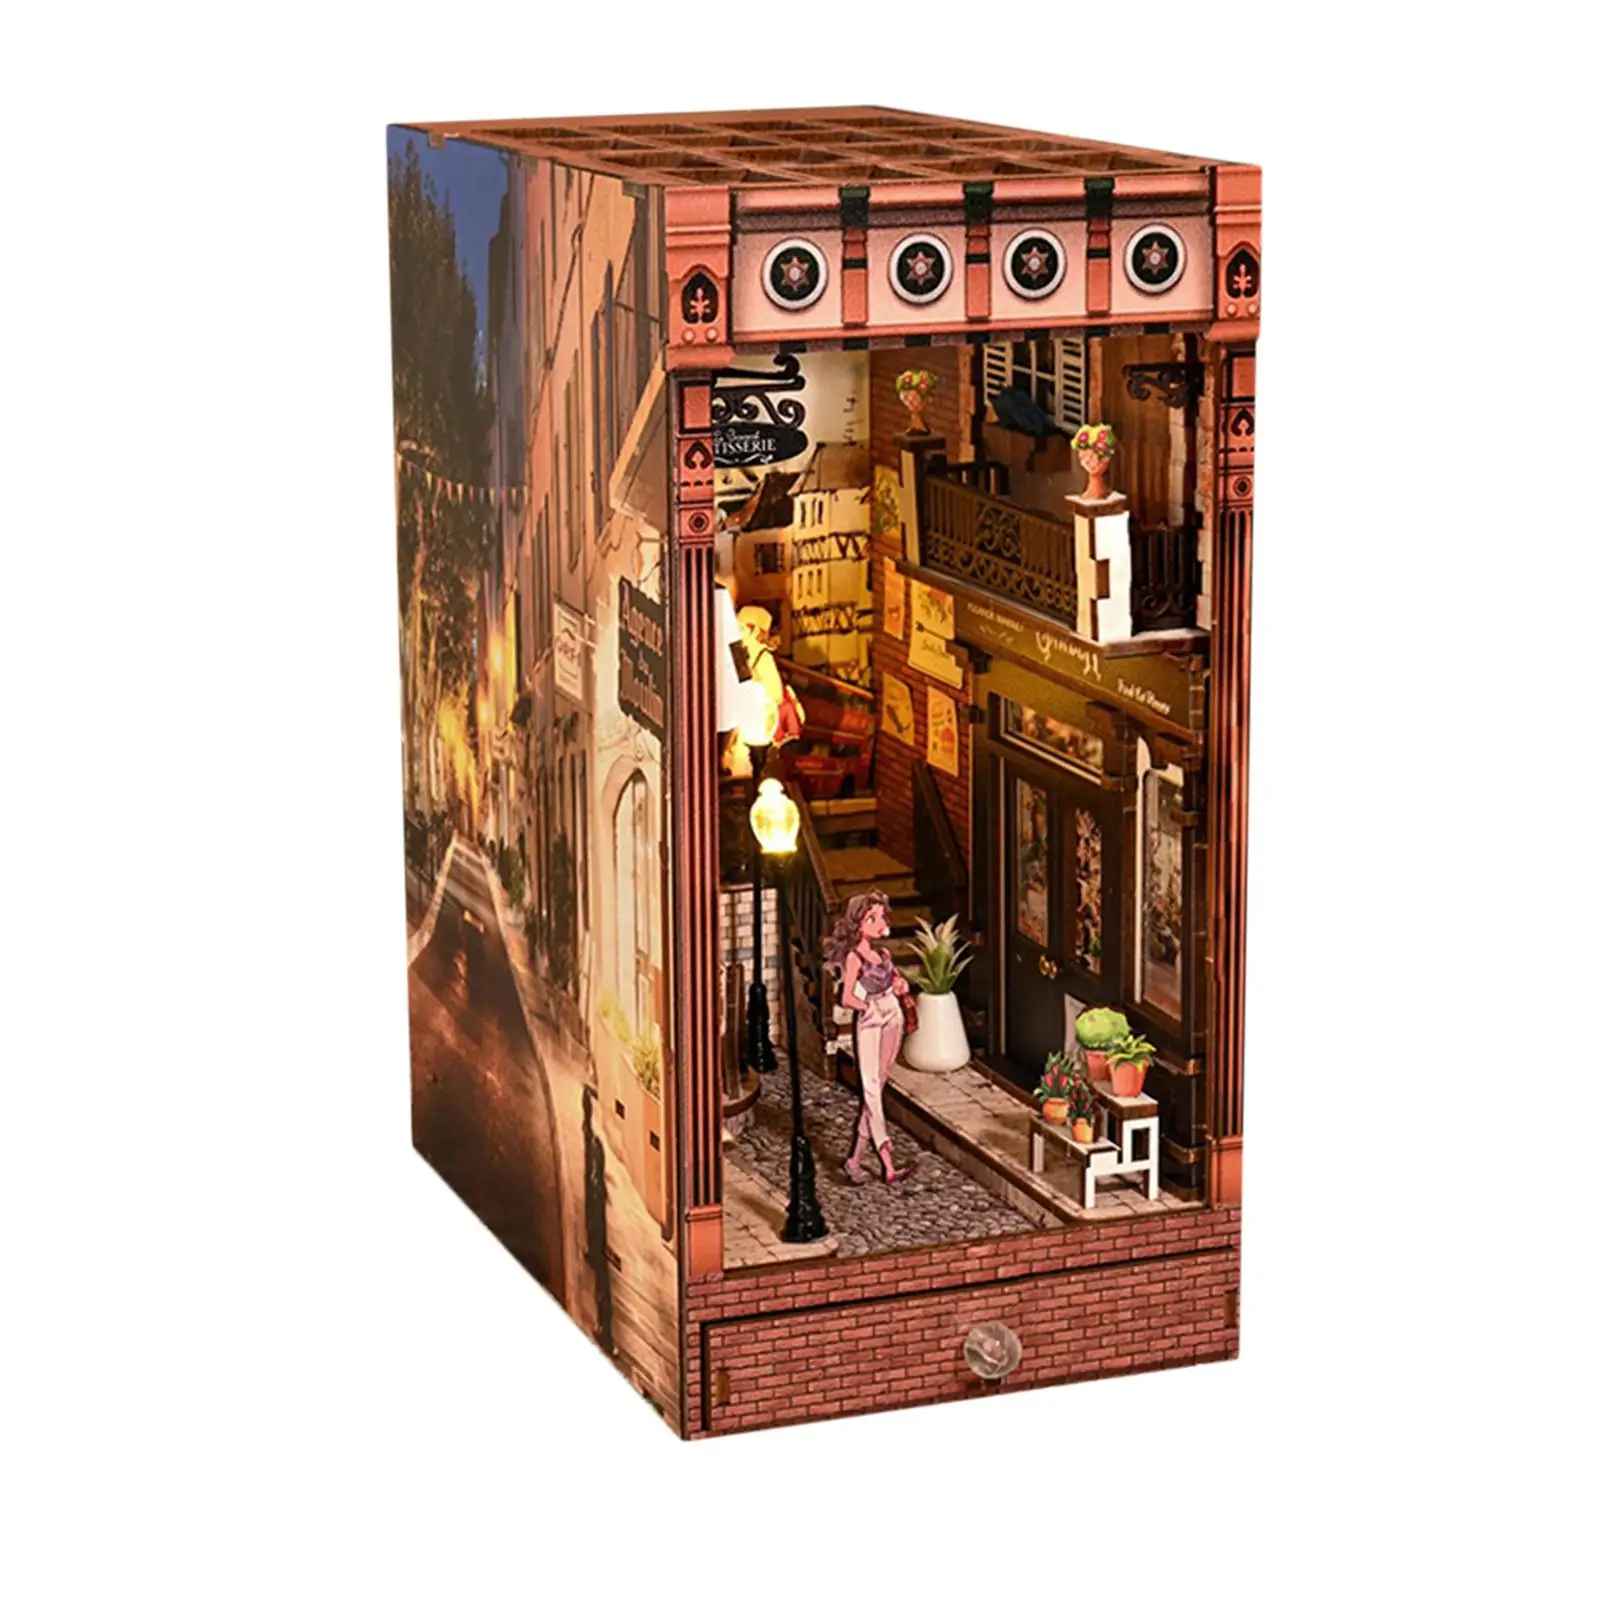 DIY Booknook Kits Decorative Hobby 3D Wooden Puzzle for Girls Teens Children